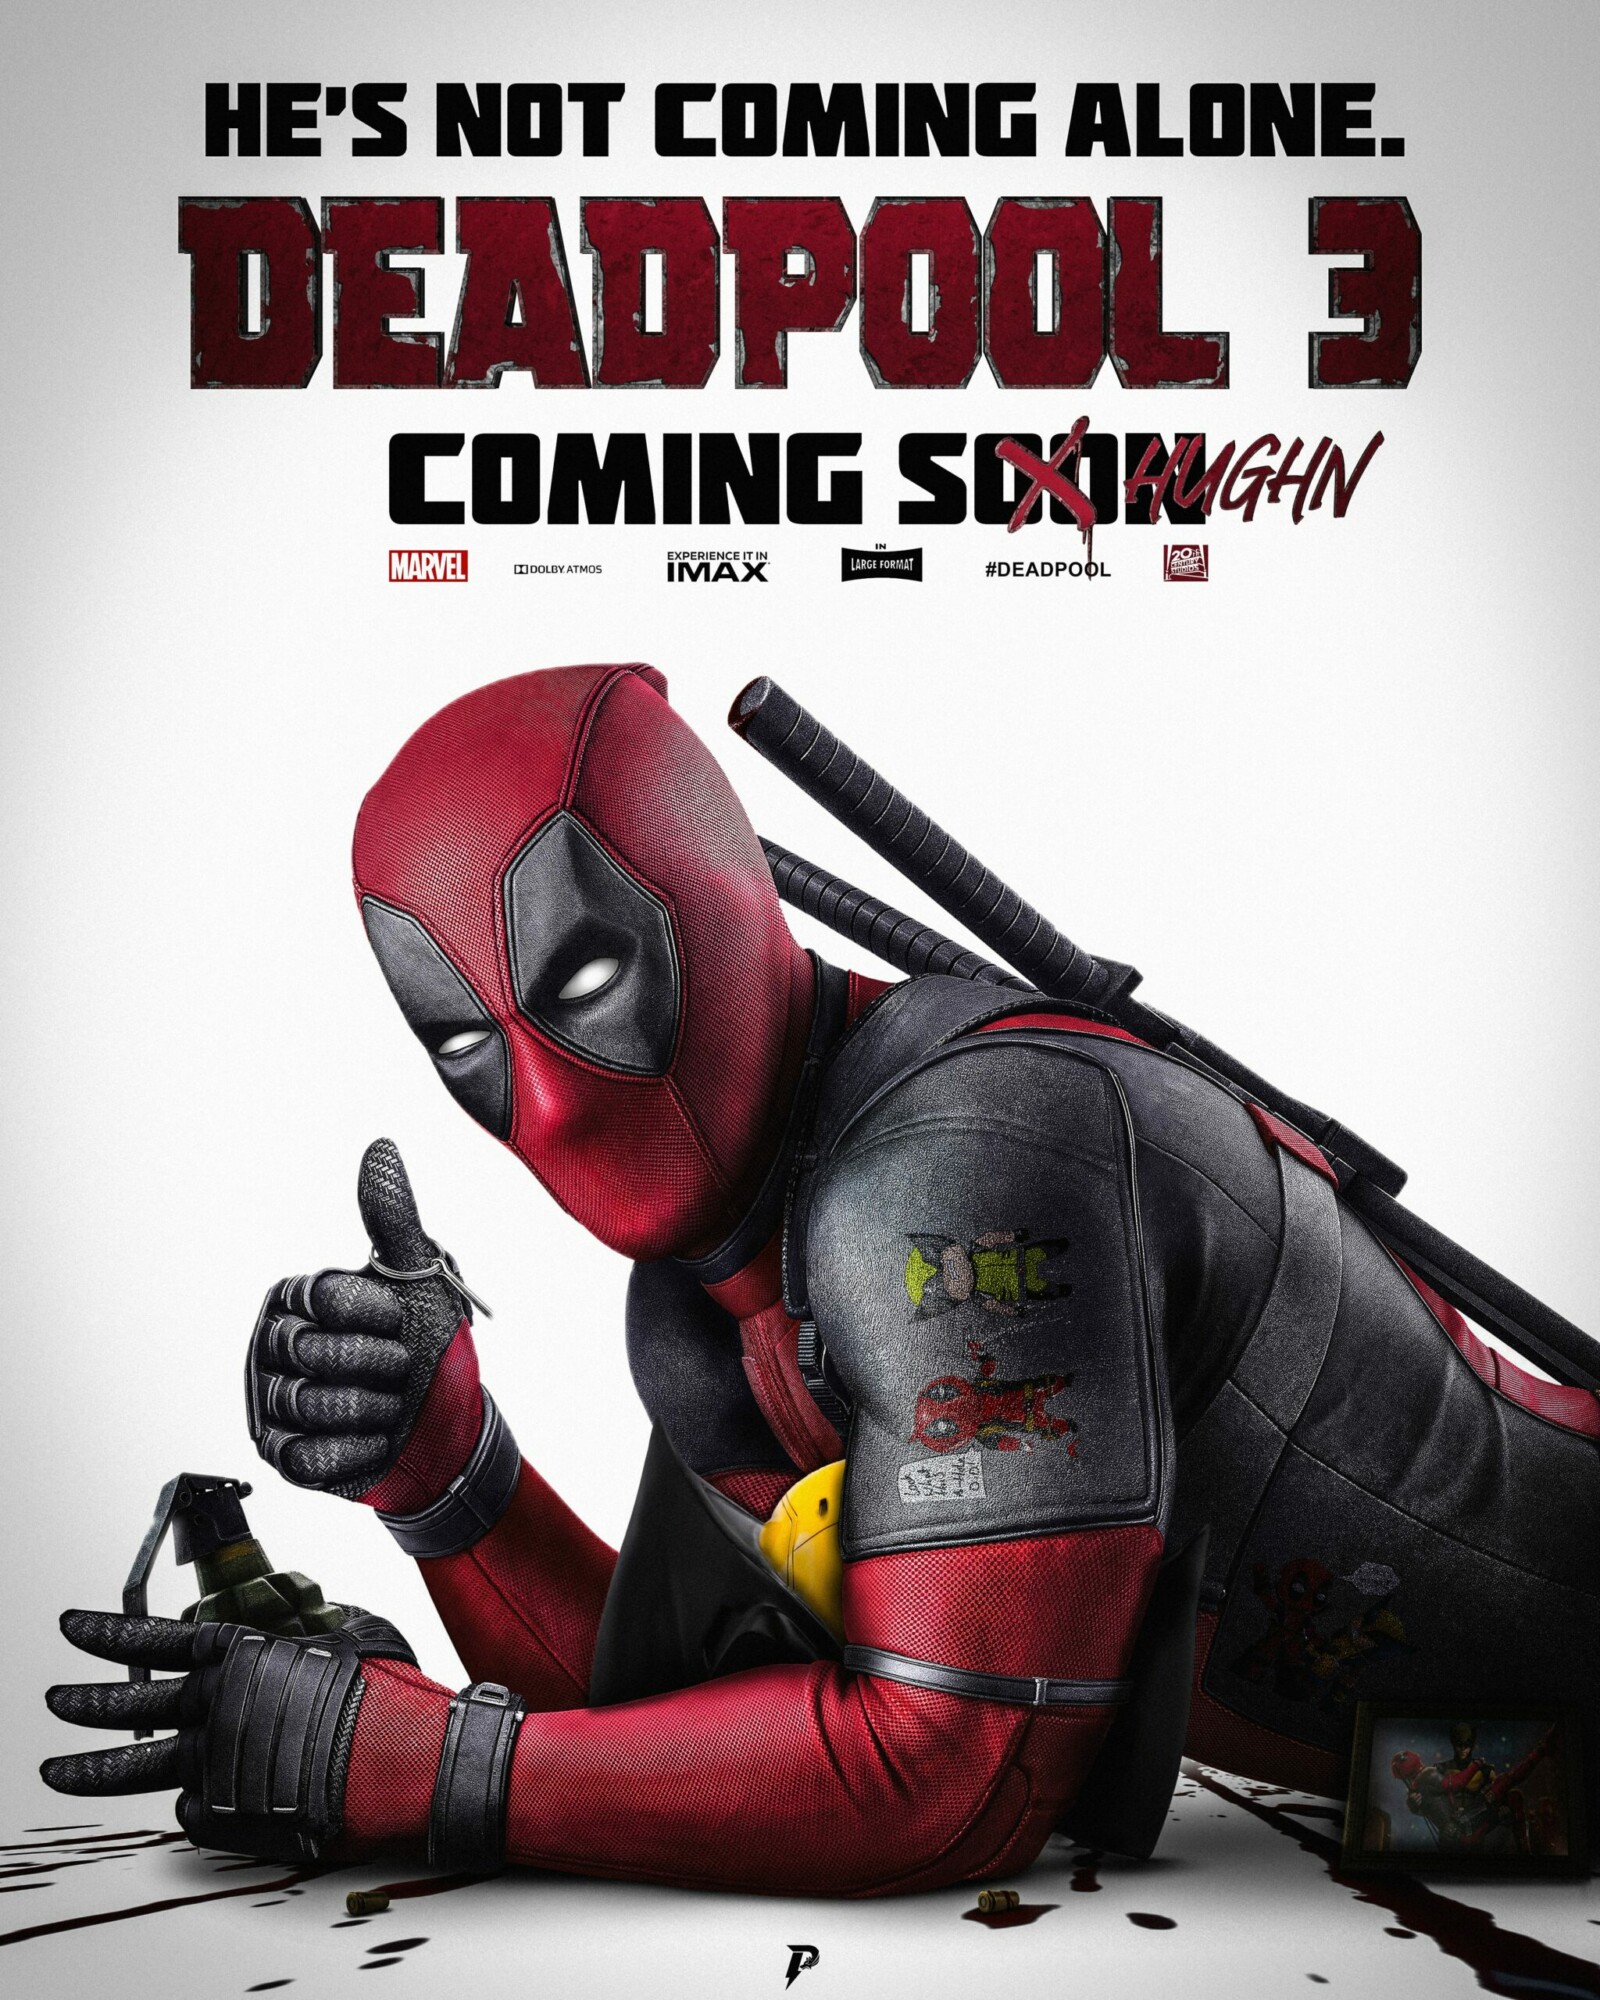 Deadpool 3 Quotes and Dialogues